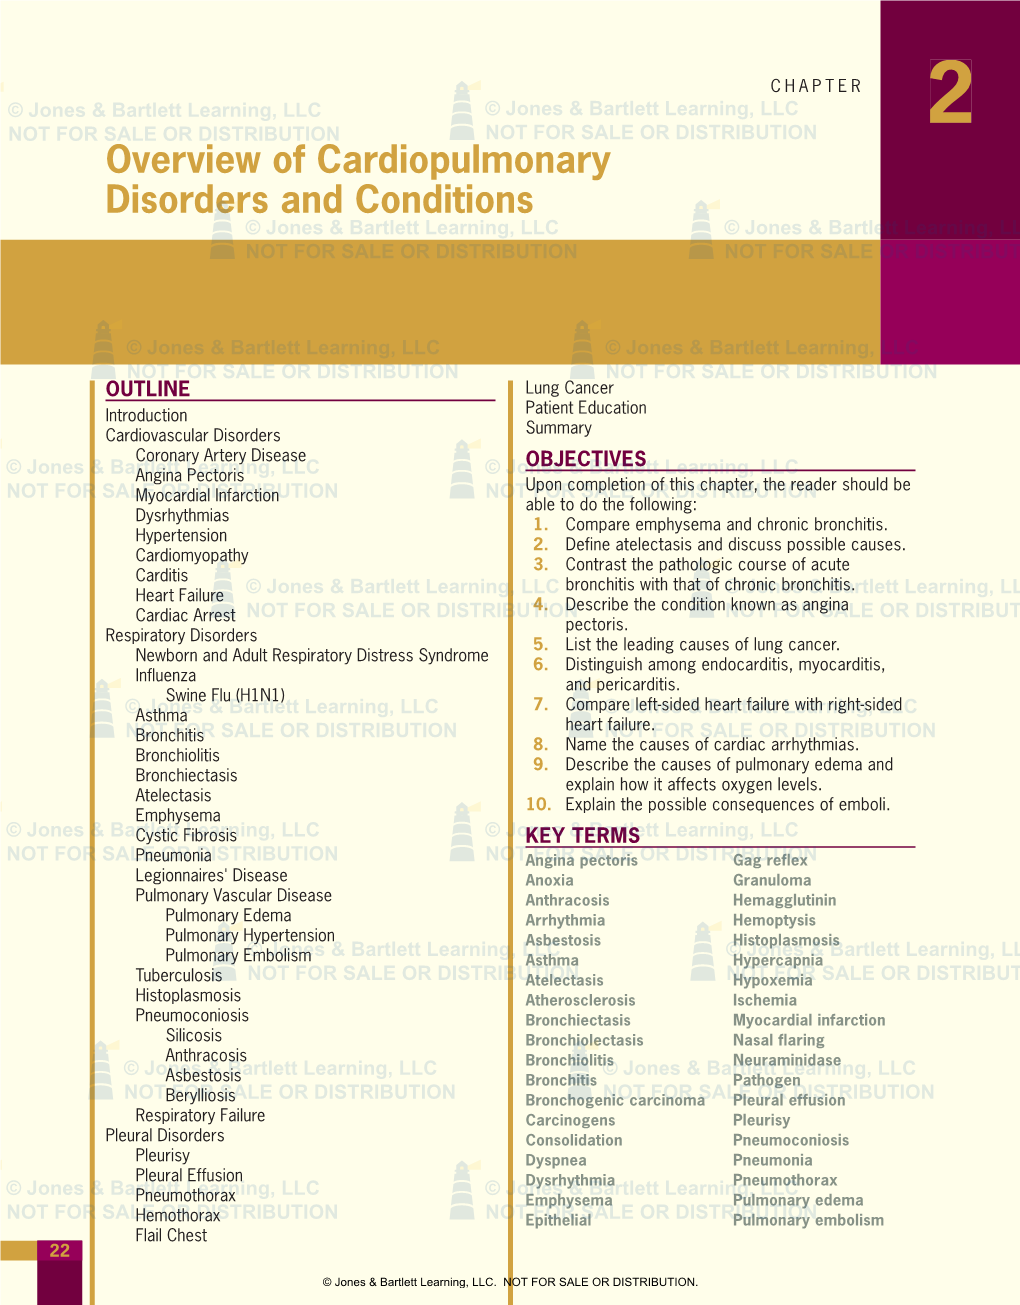 Overview of Cardiopulmonary Disorders and Conditions